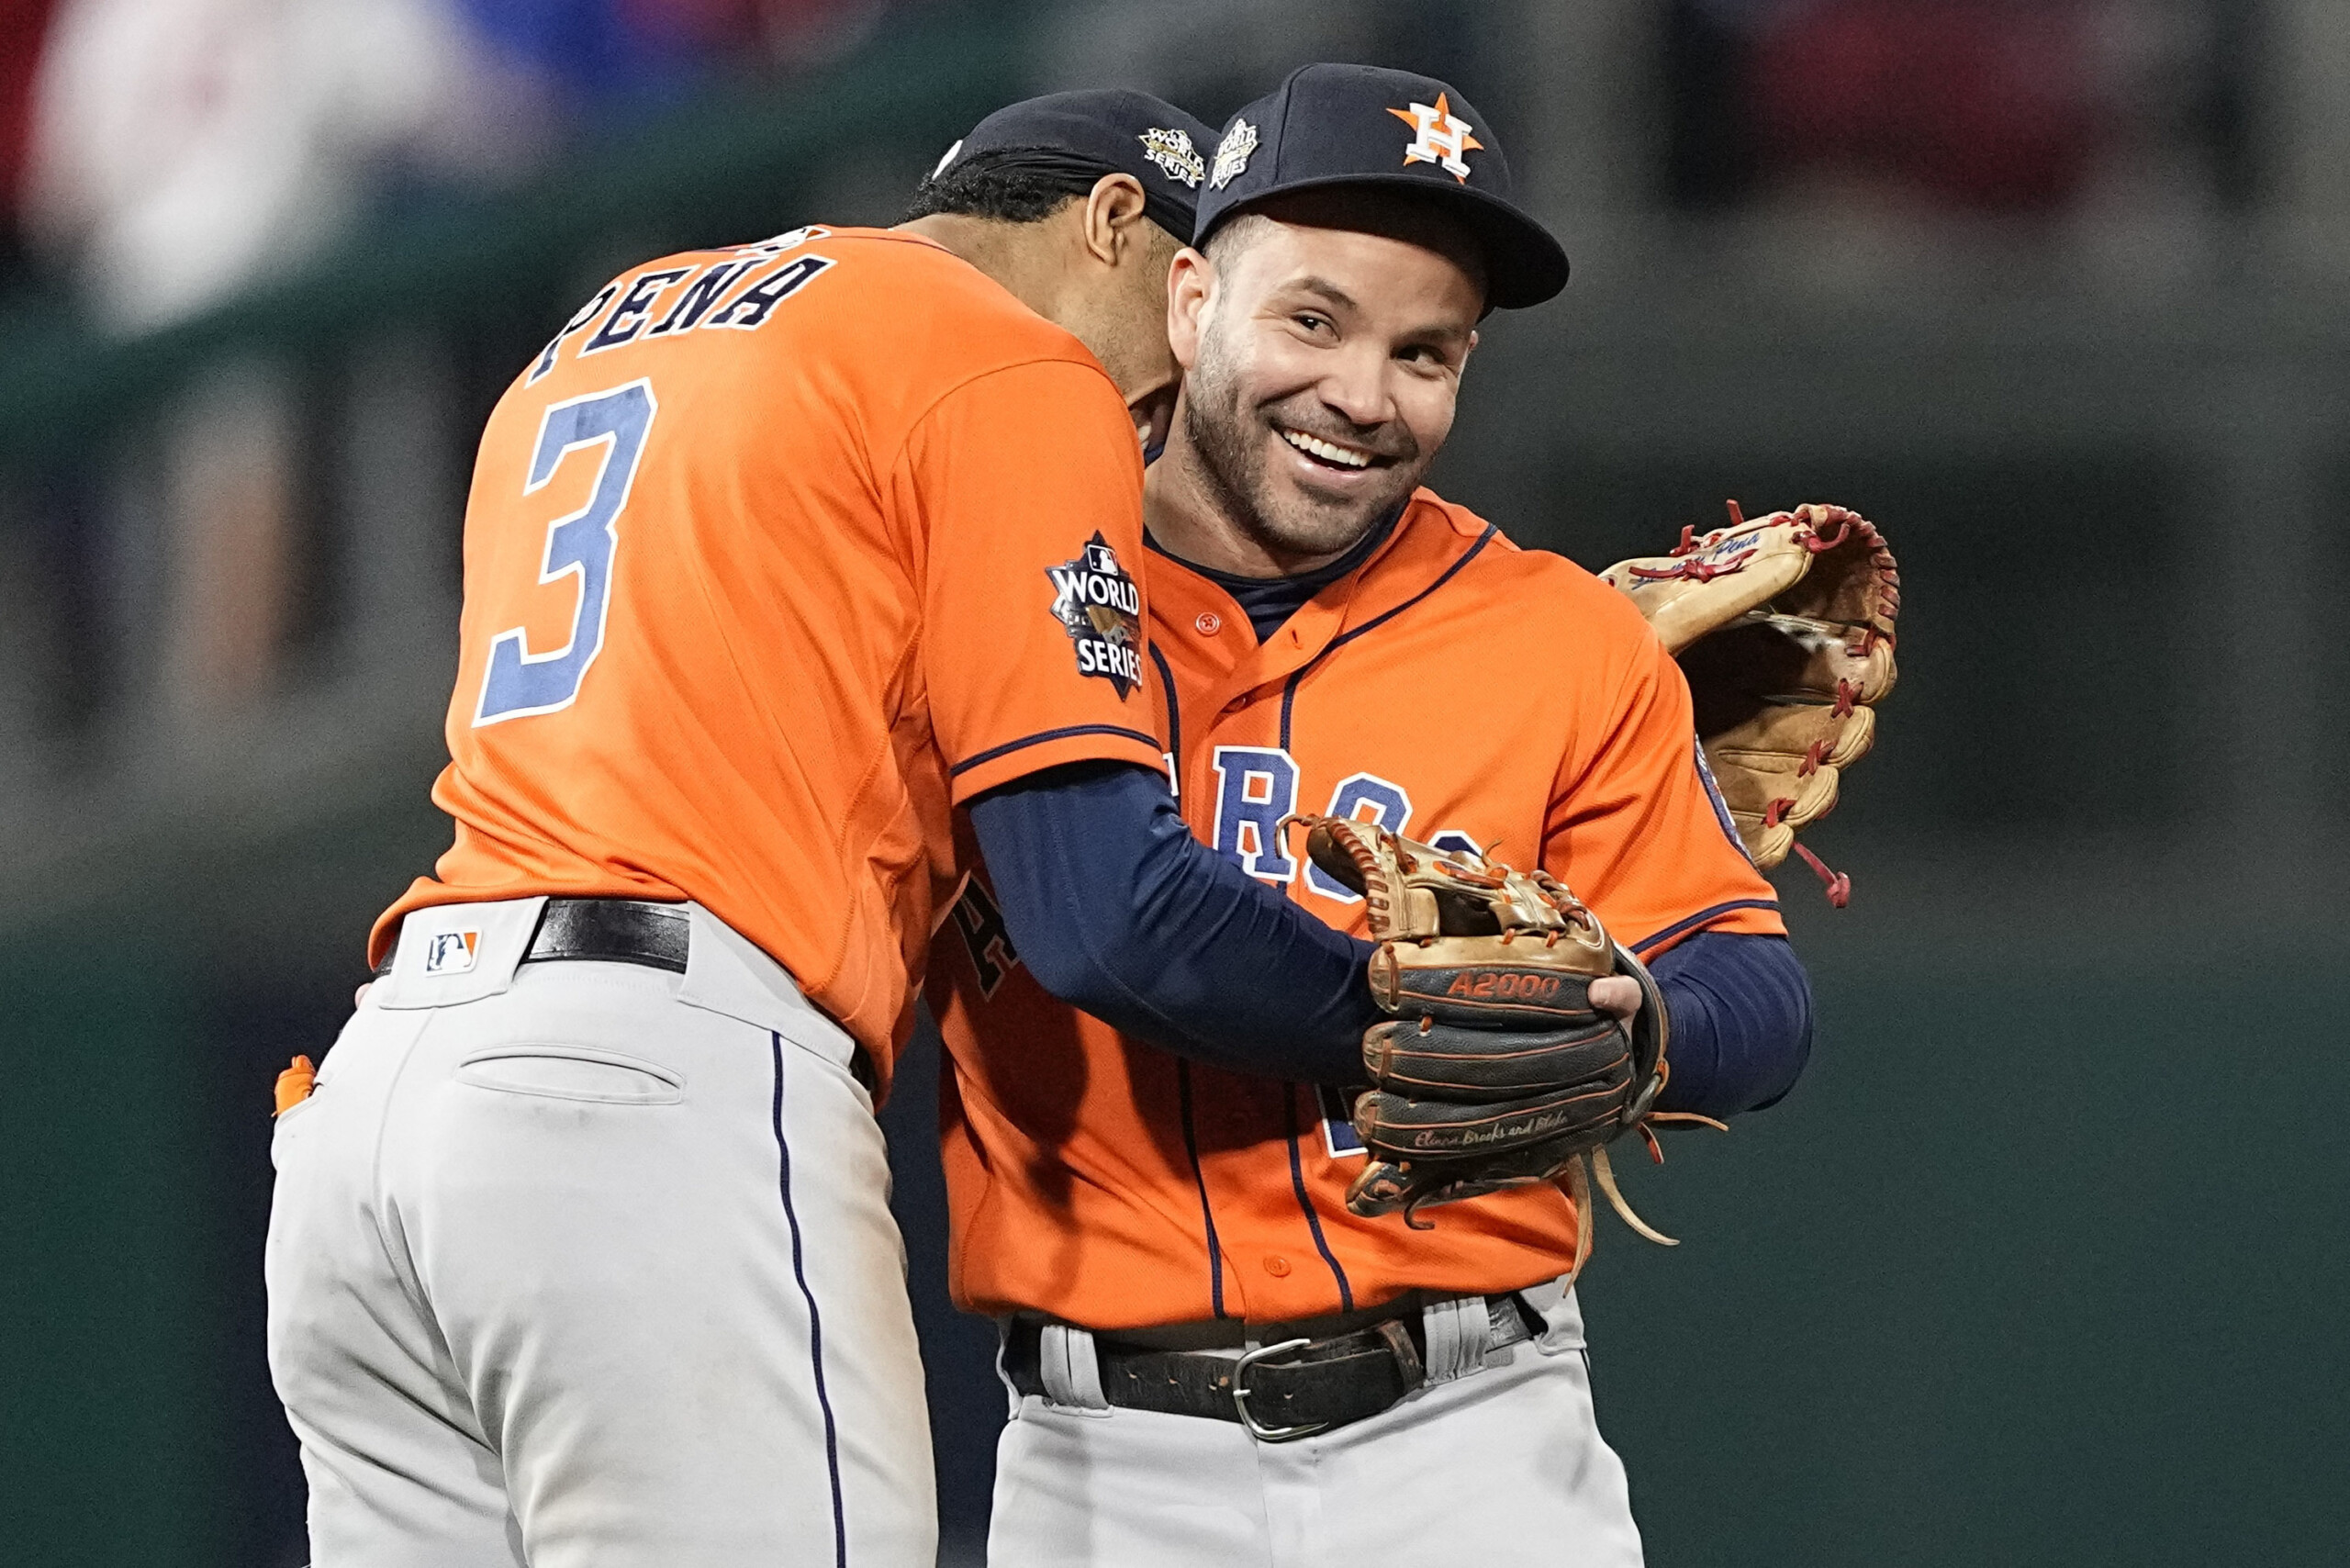 2021 World Series: Astros Win Game 5